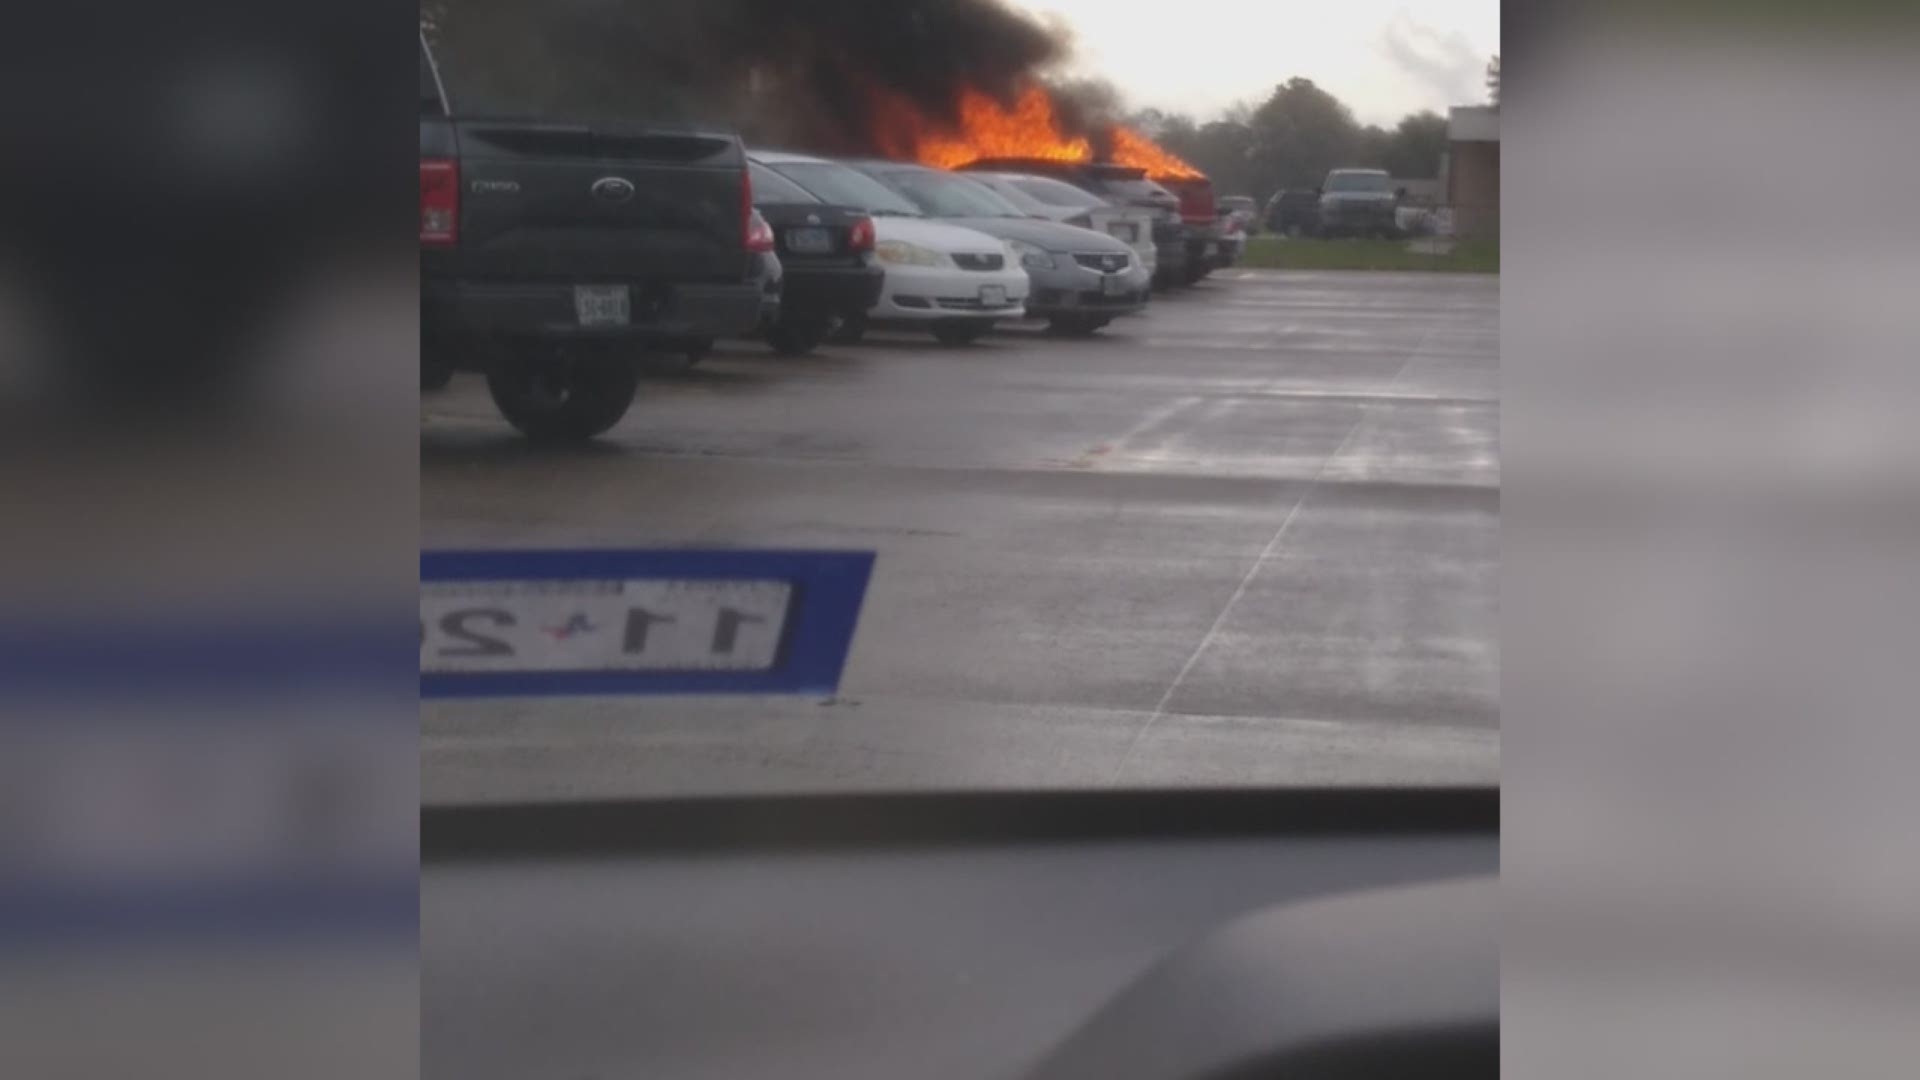 Investigations are underway after a car caught on fire in the Nederland HS parking lot.